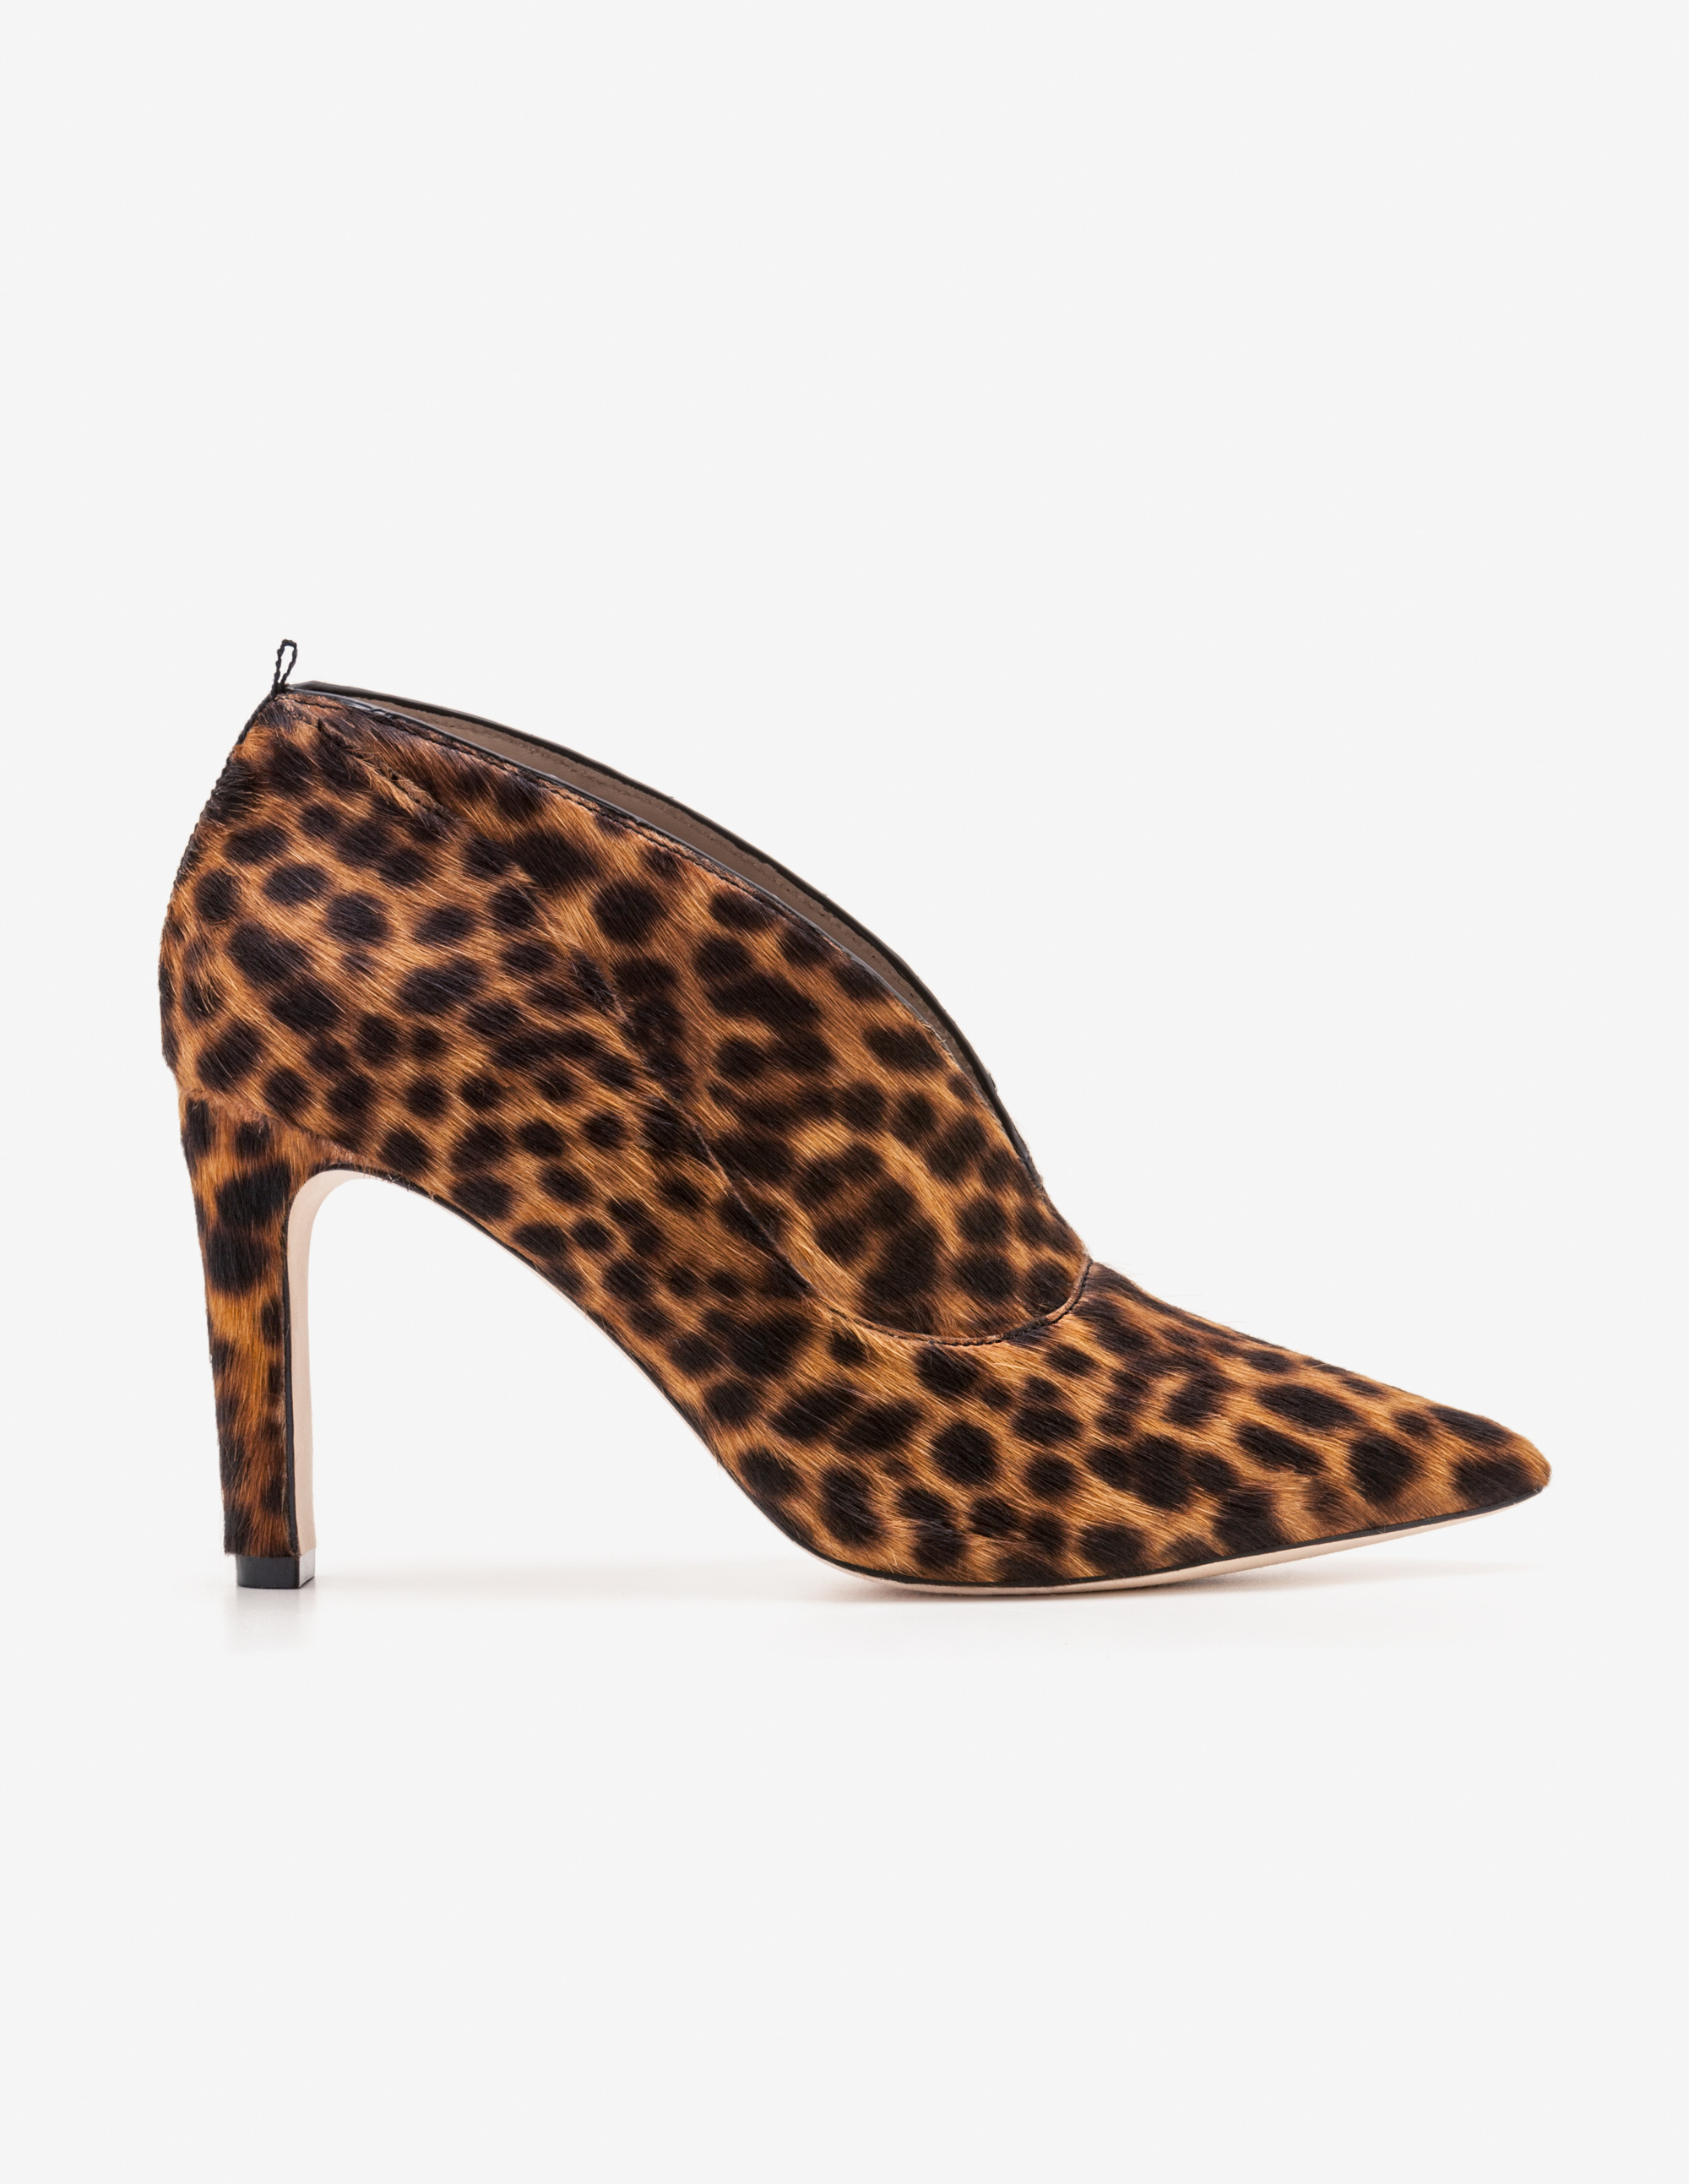 Boden Roseberry Heeled Ankle Boots Leopard Print